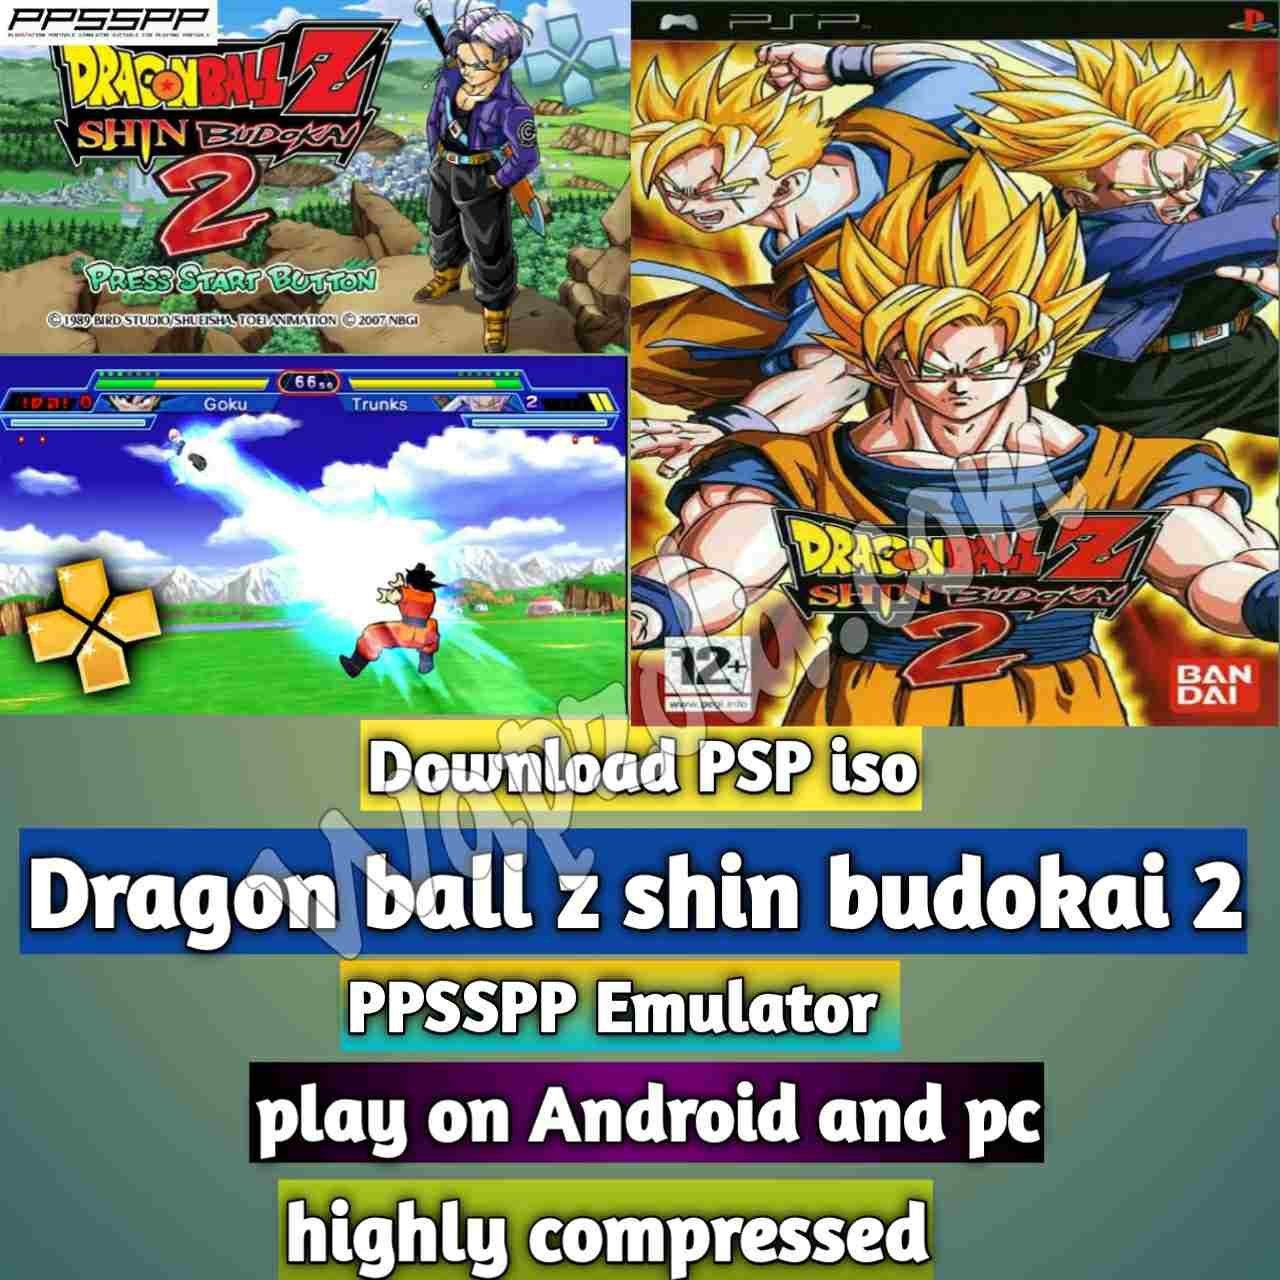 You are currently viewing [Télécharger] Dragon ball z shin budokai 2 iso ppsspp emulator – PSP APK Iso ROM hautement compressé 300MB